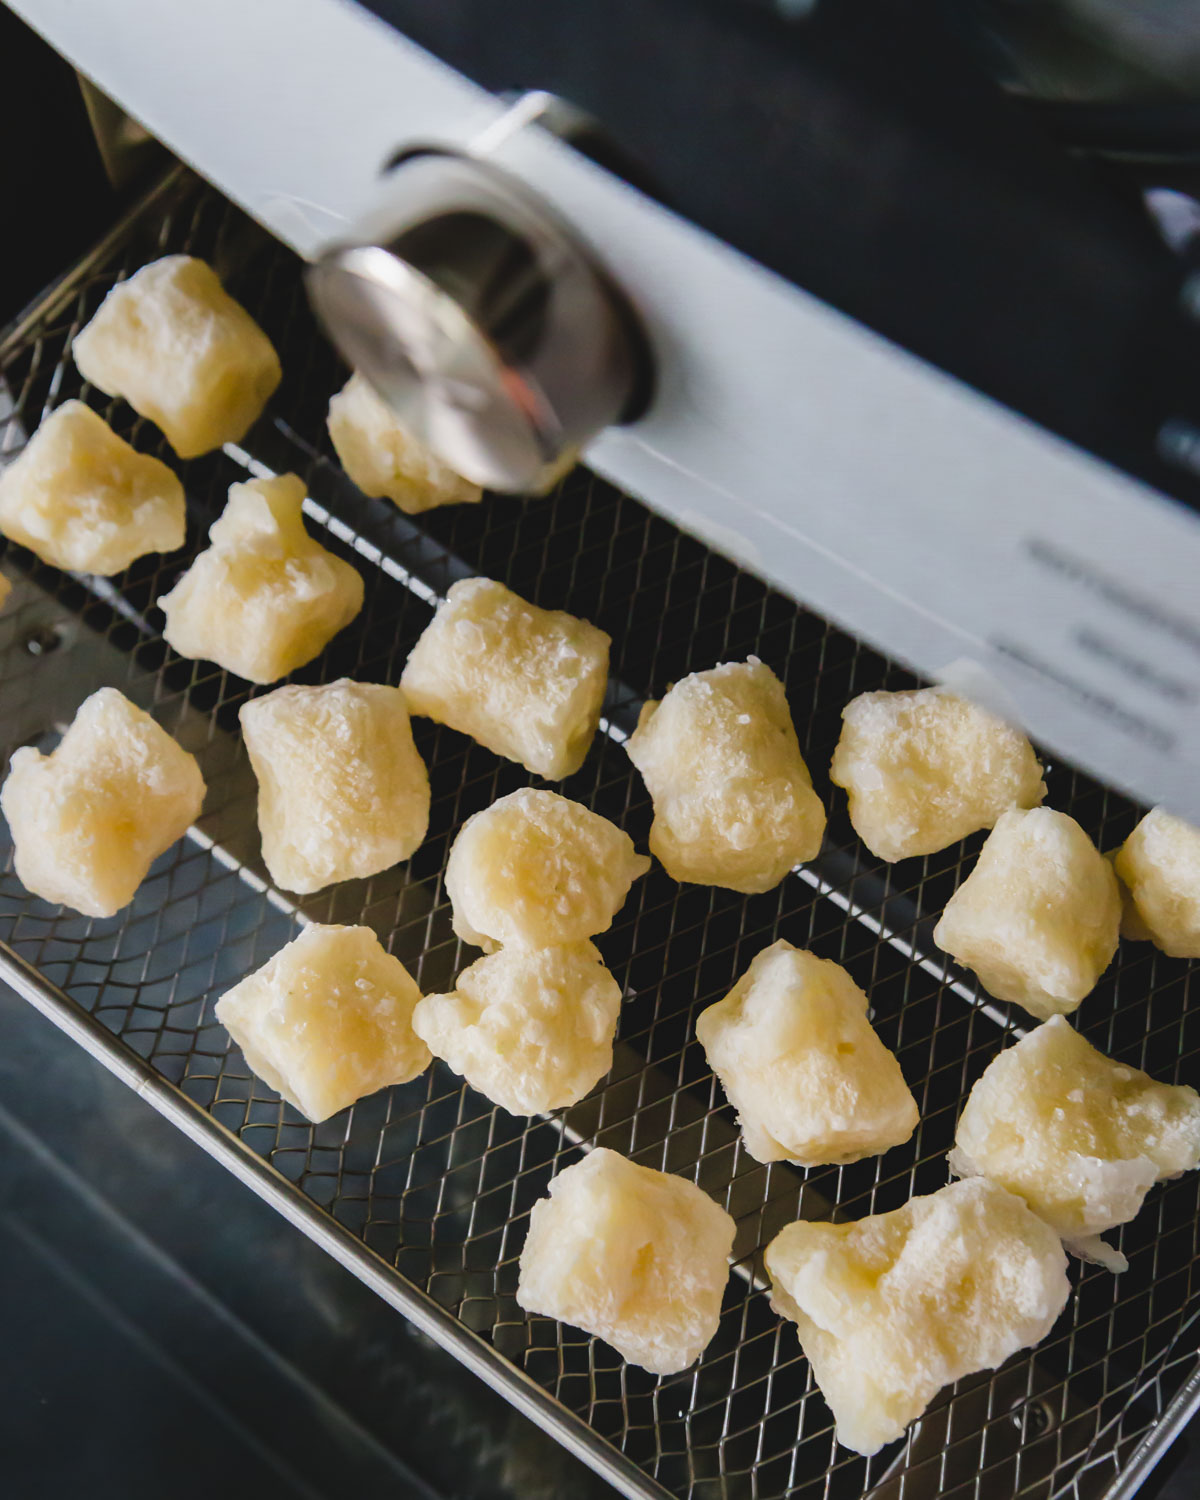 Frozen cauliflower gnocchi is cooked in an air fryer from the frozen state at 400 degrees for 18 minutes.